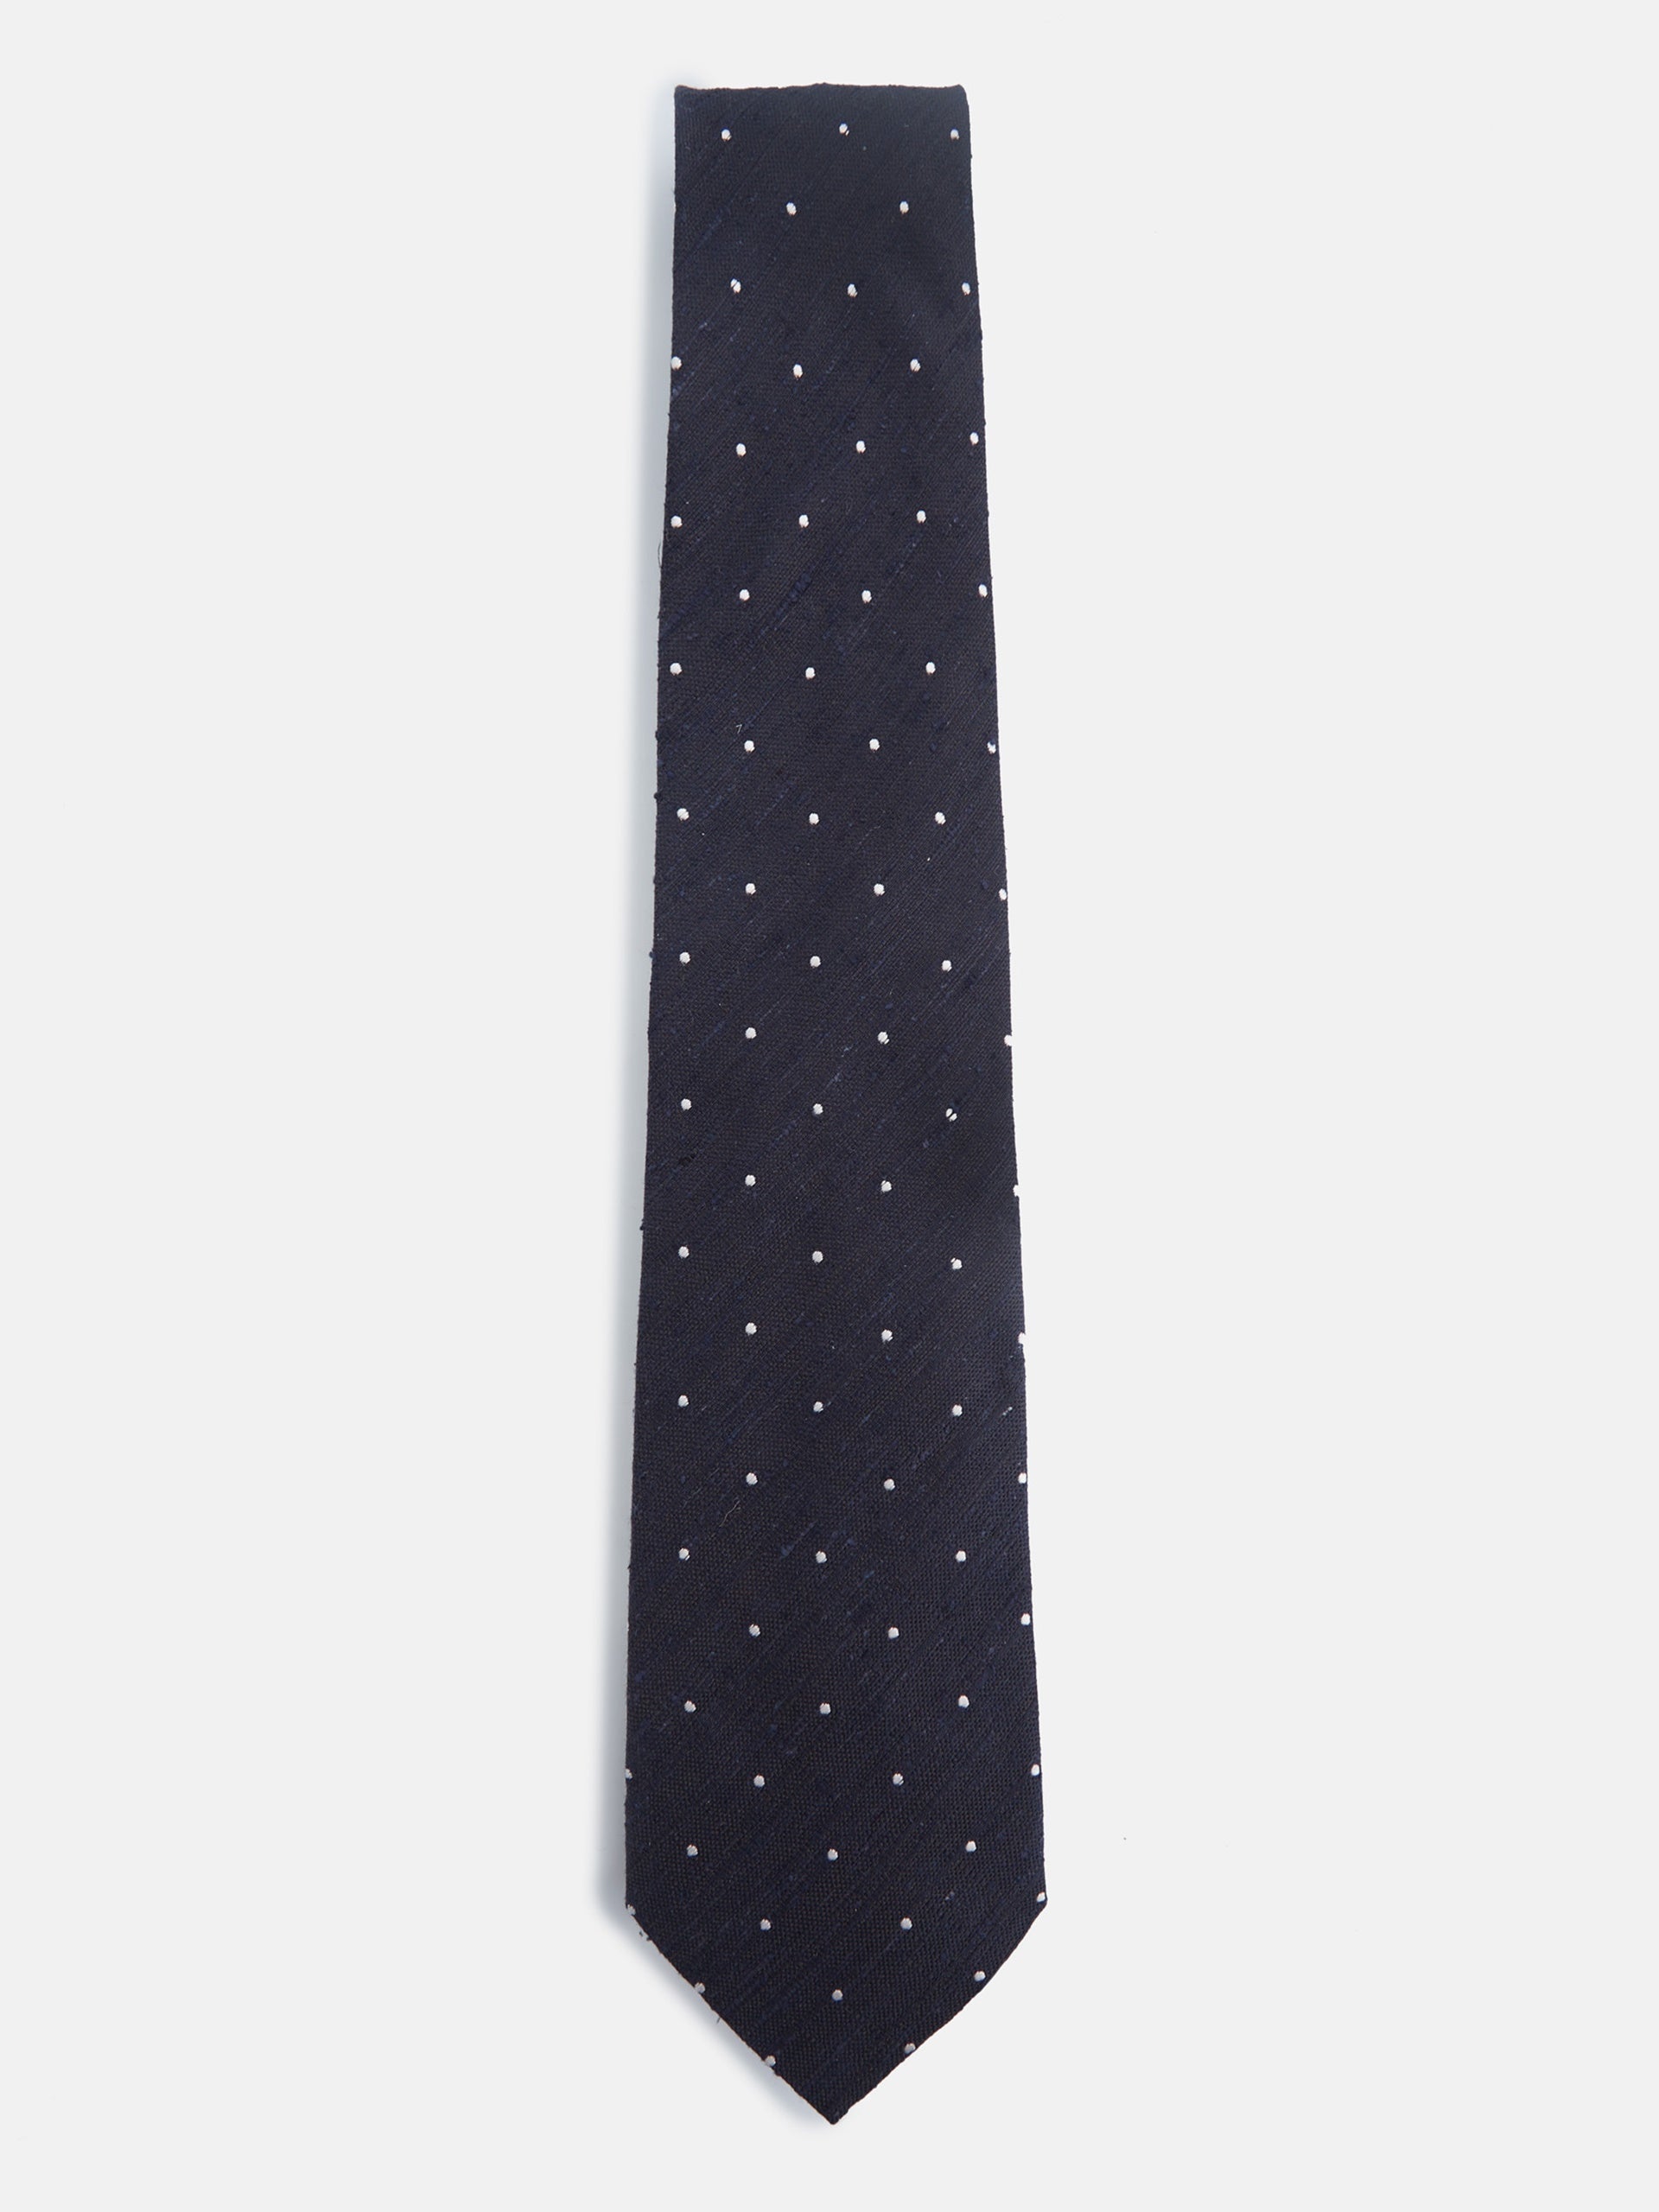 Navy blue dotted tie